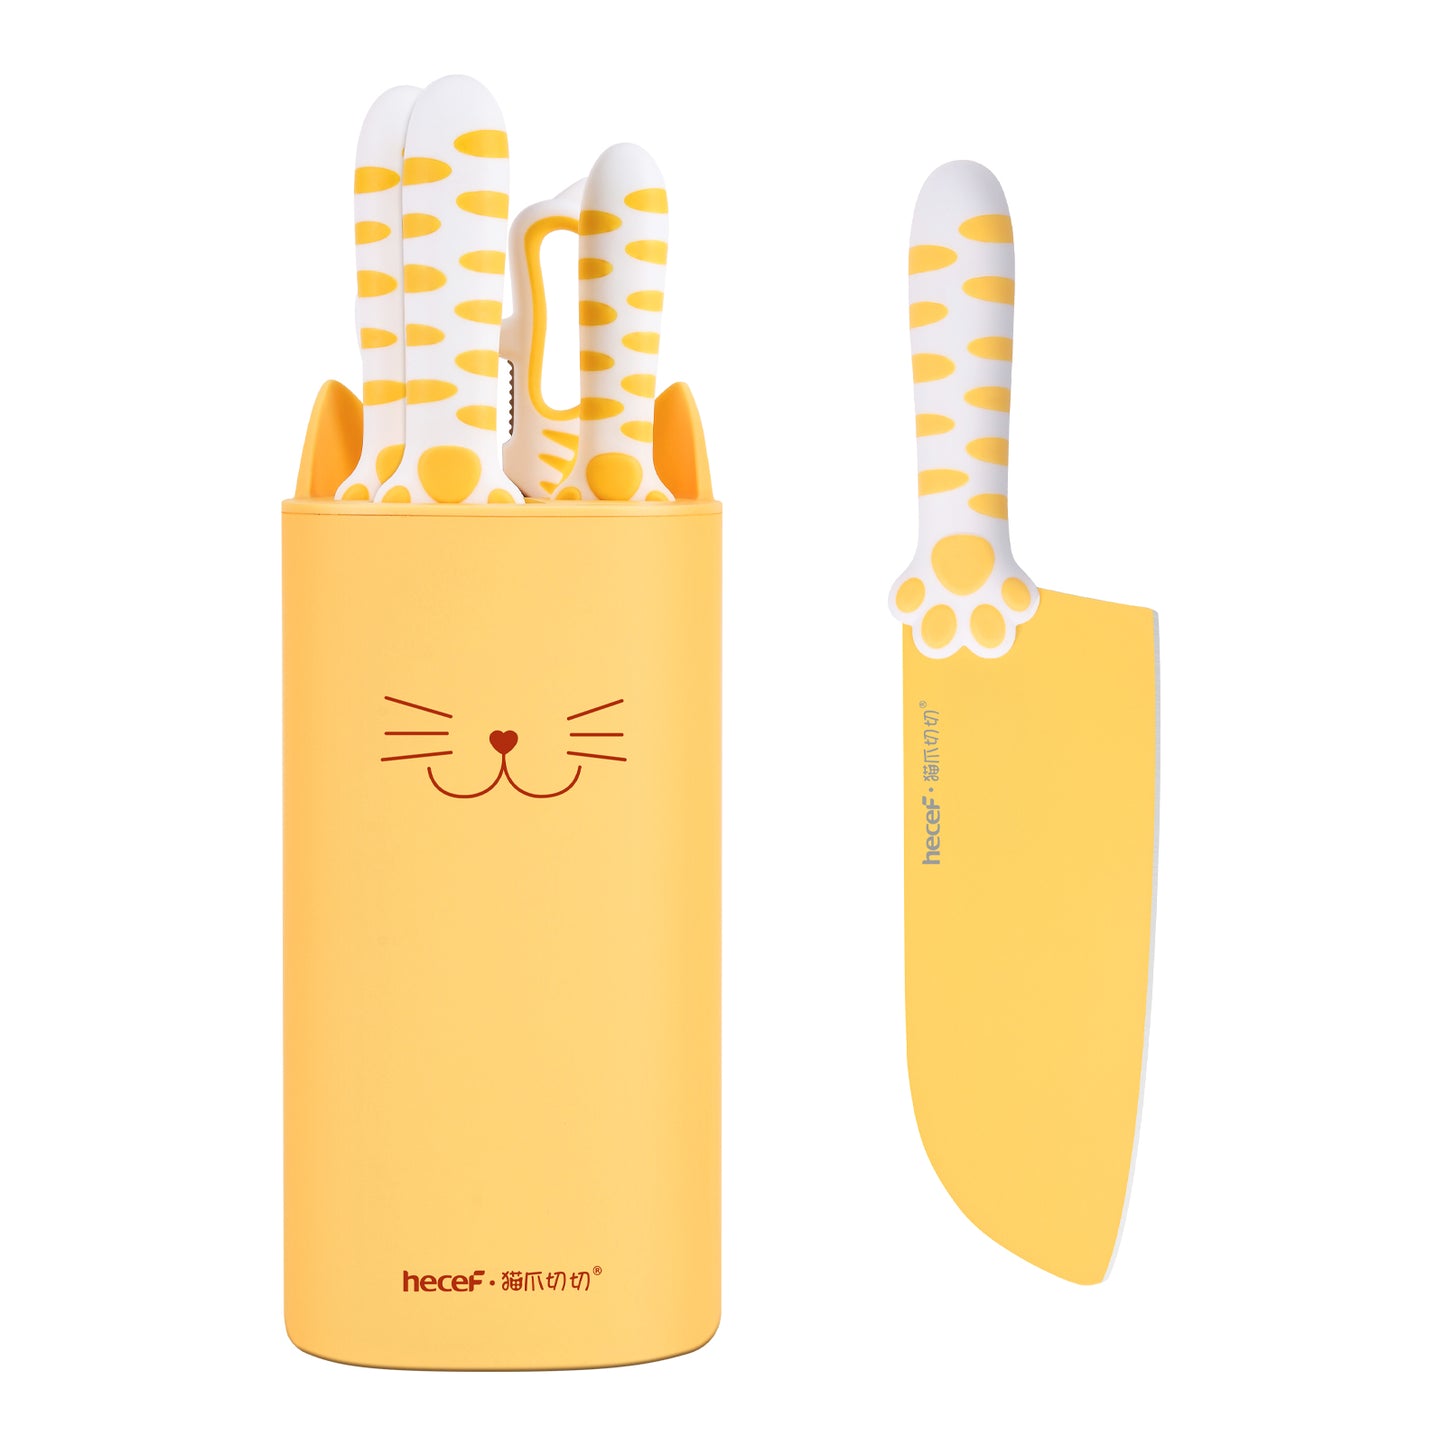 hecef Cute Kitchen Knife Set,5-piece Non-Stcik Knives Set with Detachable Block and Scissors,Sharp Kitchen Knives for Chopping, Slicing, Dicing and Cutting - Hecef Kitchen